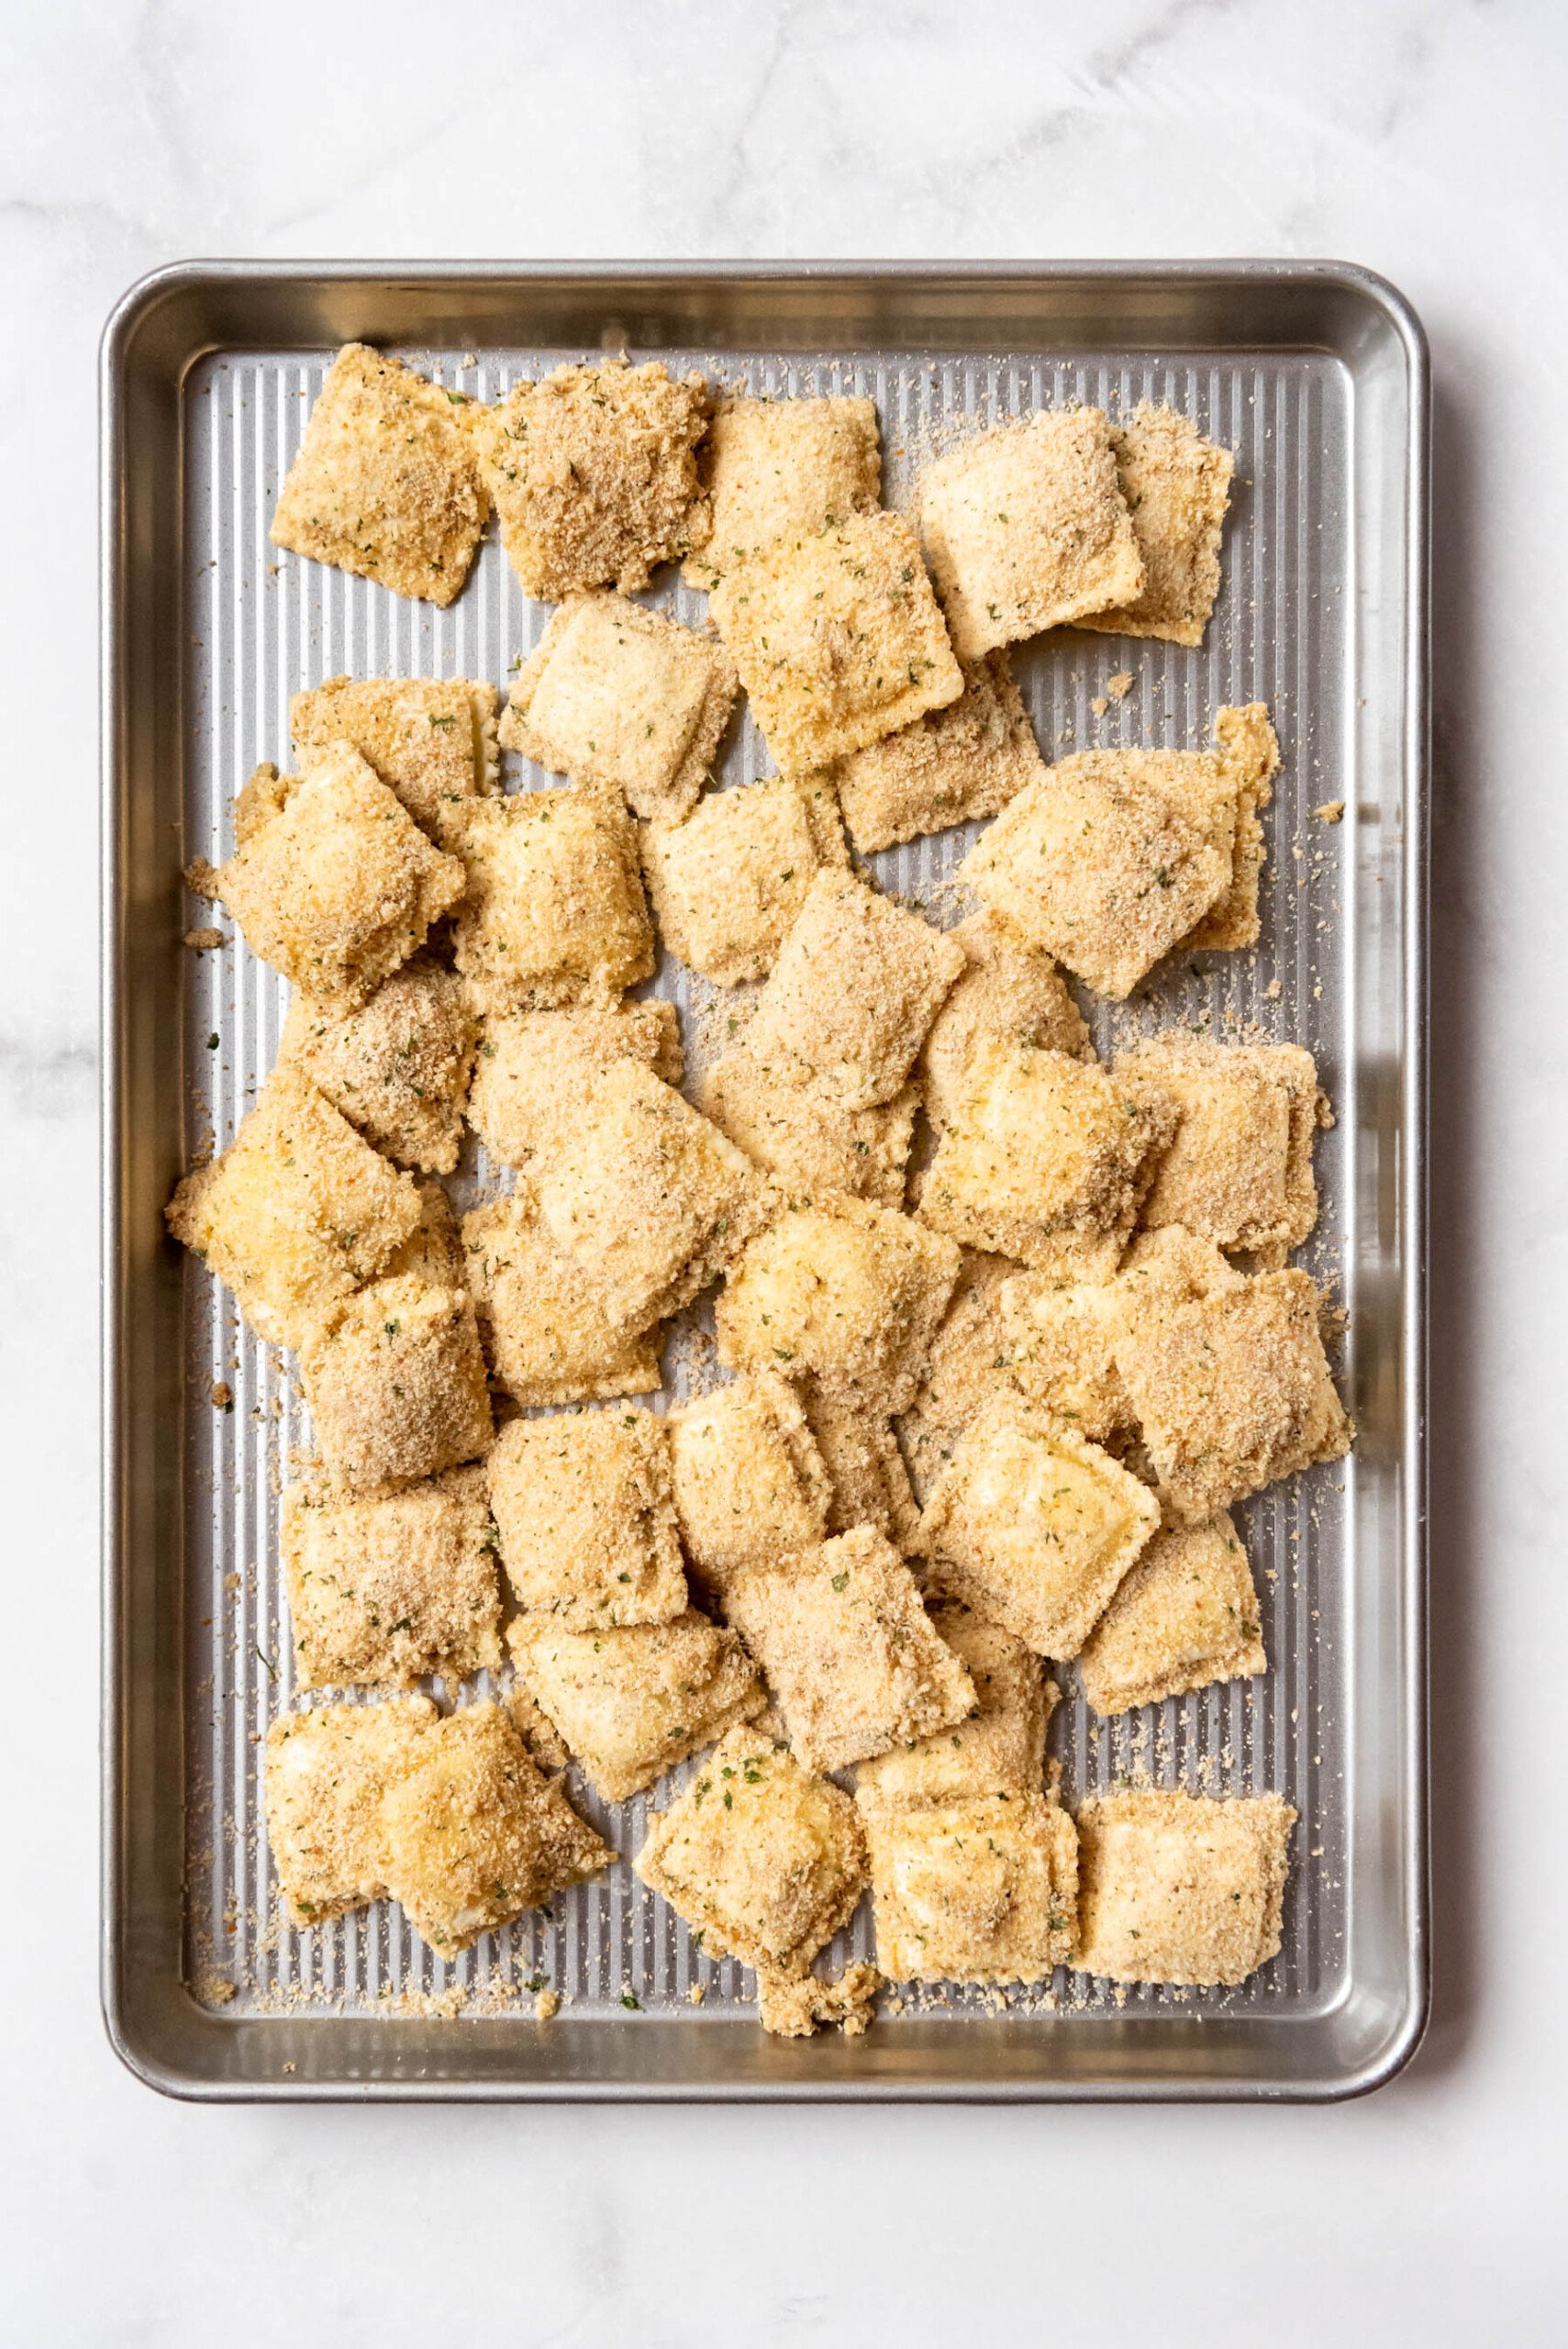 Breaded frozen cheese ravioli on a baking sheet ready to be cooked.